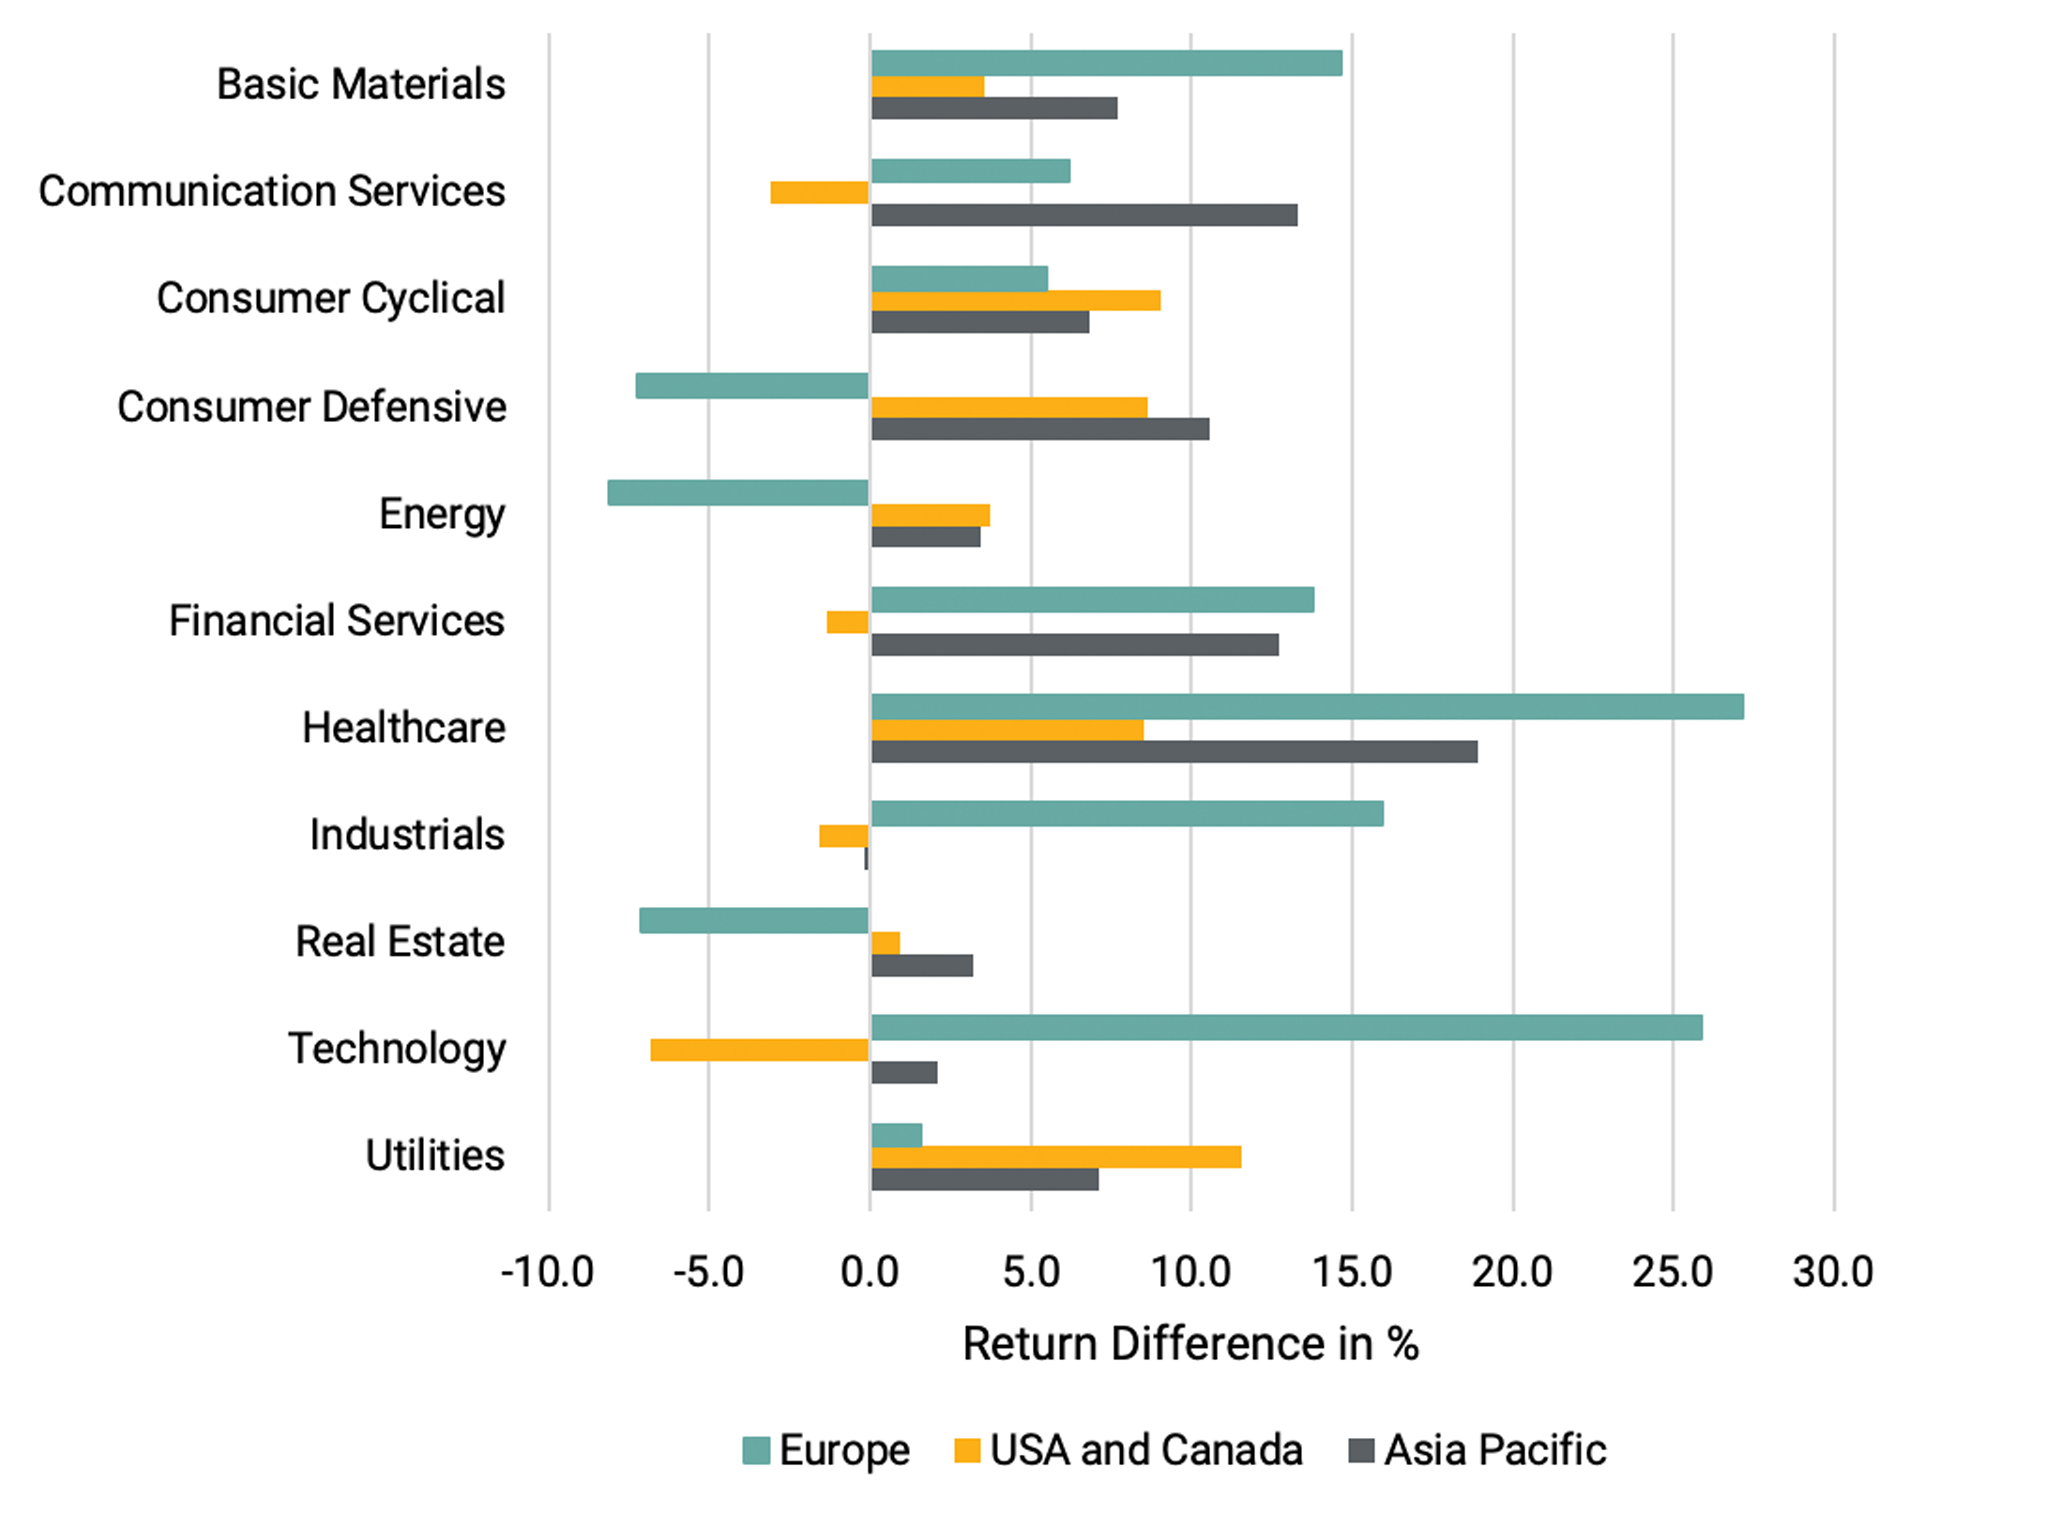 Bar chart showing the annualized return spread between low- and high-ESG-risk portfolios across sectors in Europe, the USA and Canada, and Asia Pacific.